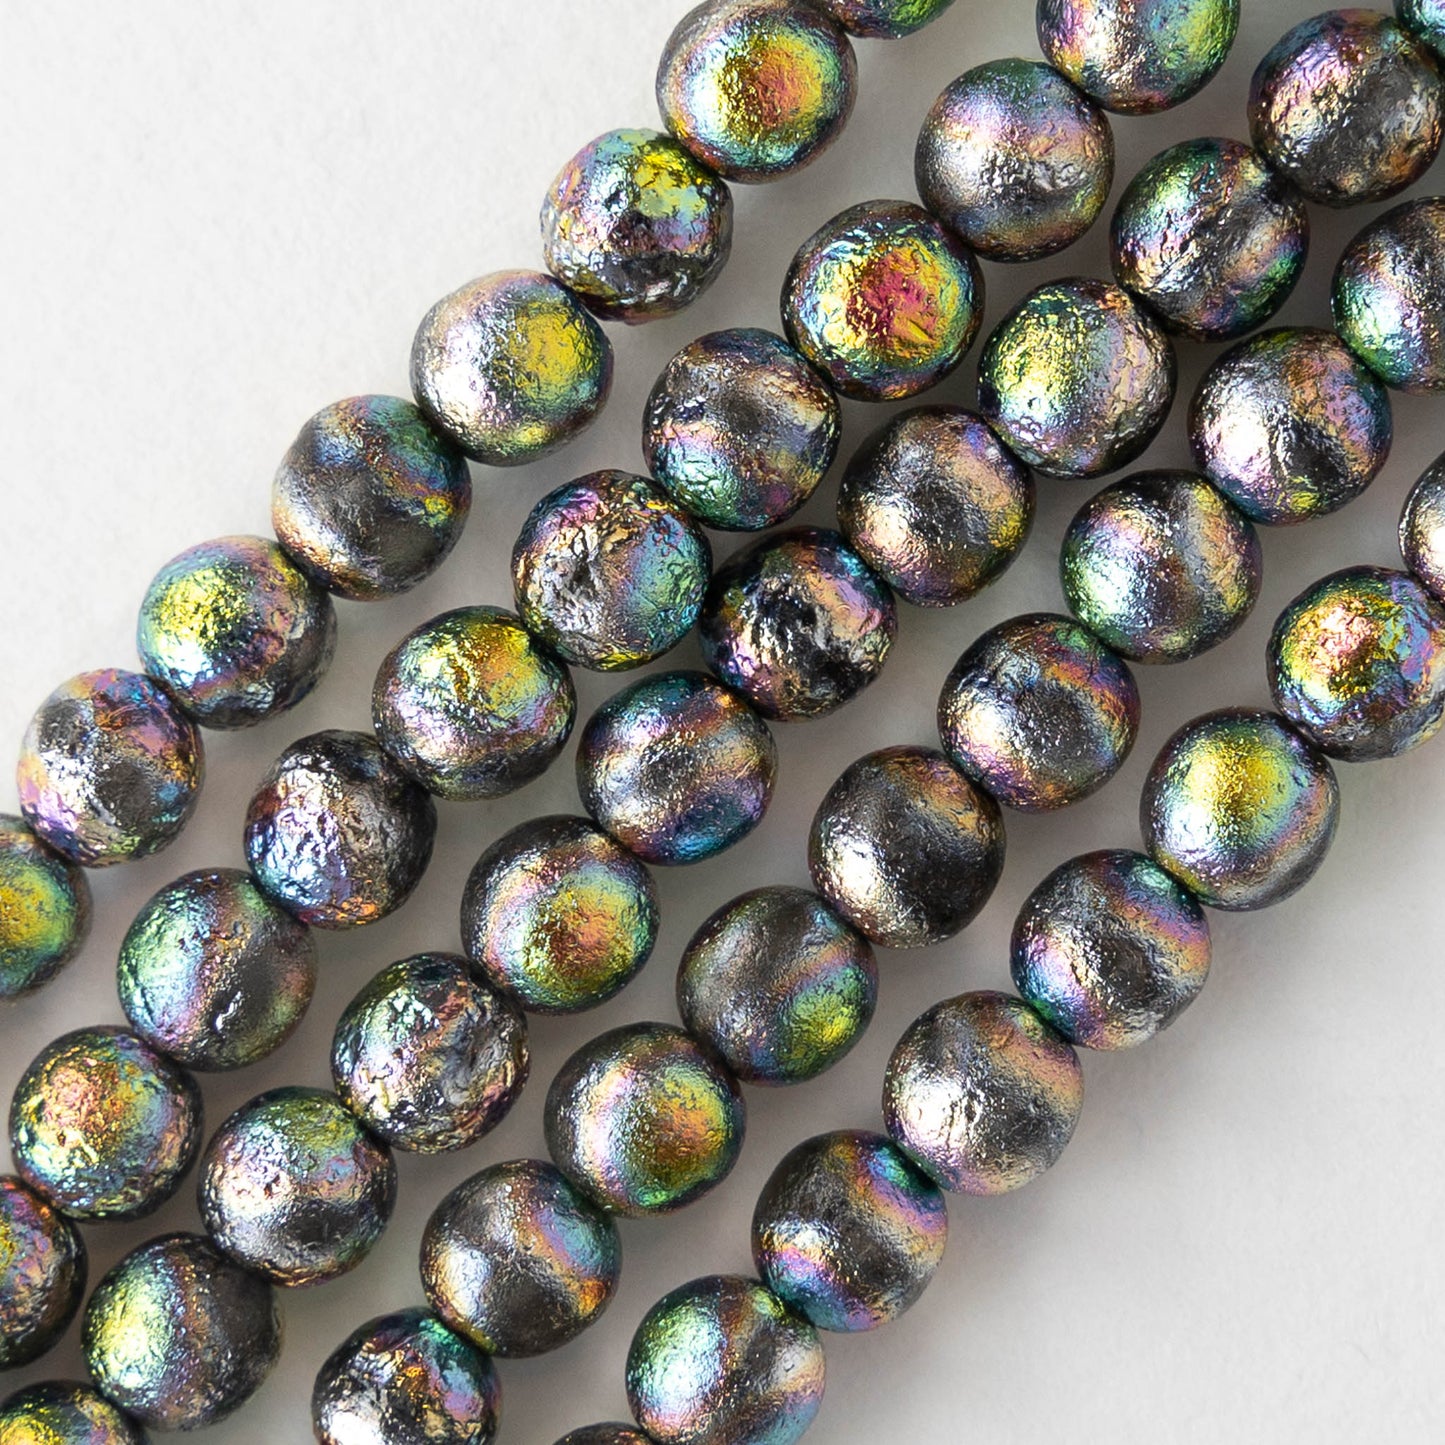 6mm Round Glass Beads - Etched Northern Lights - 25 beads